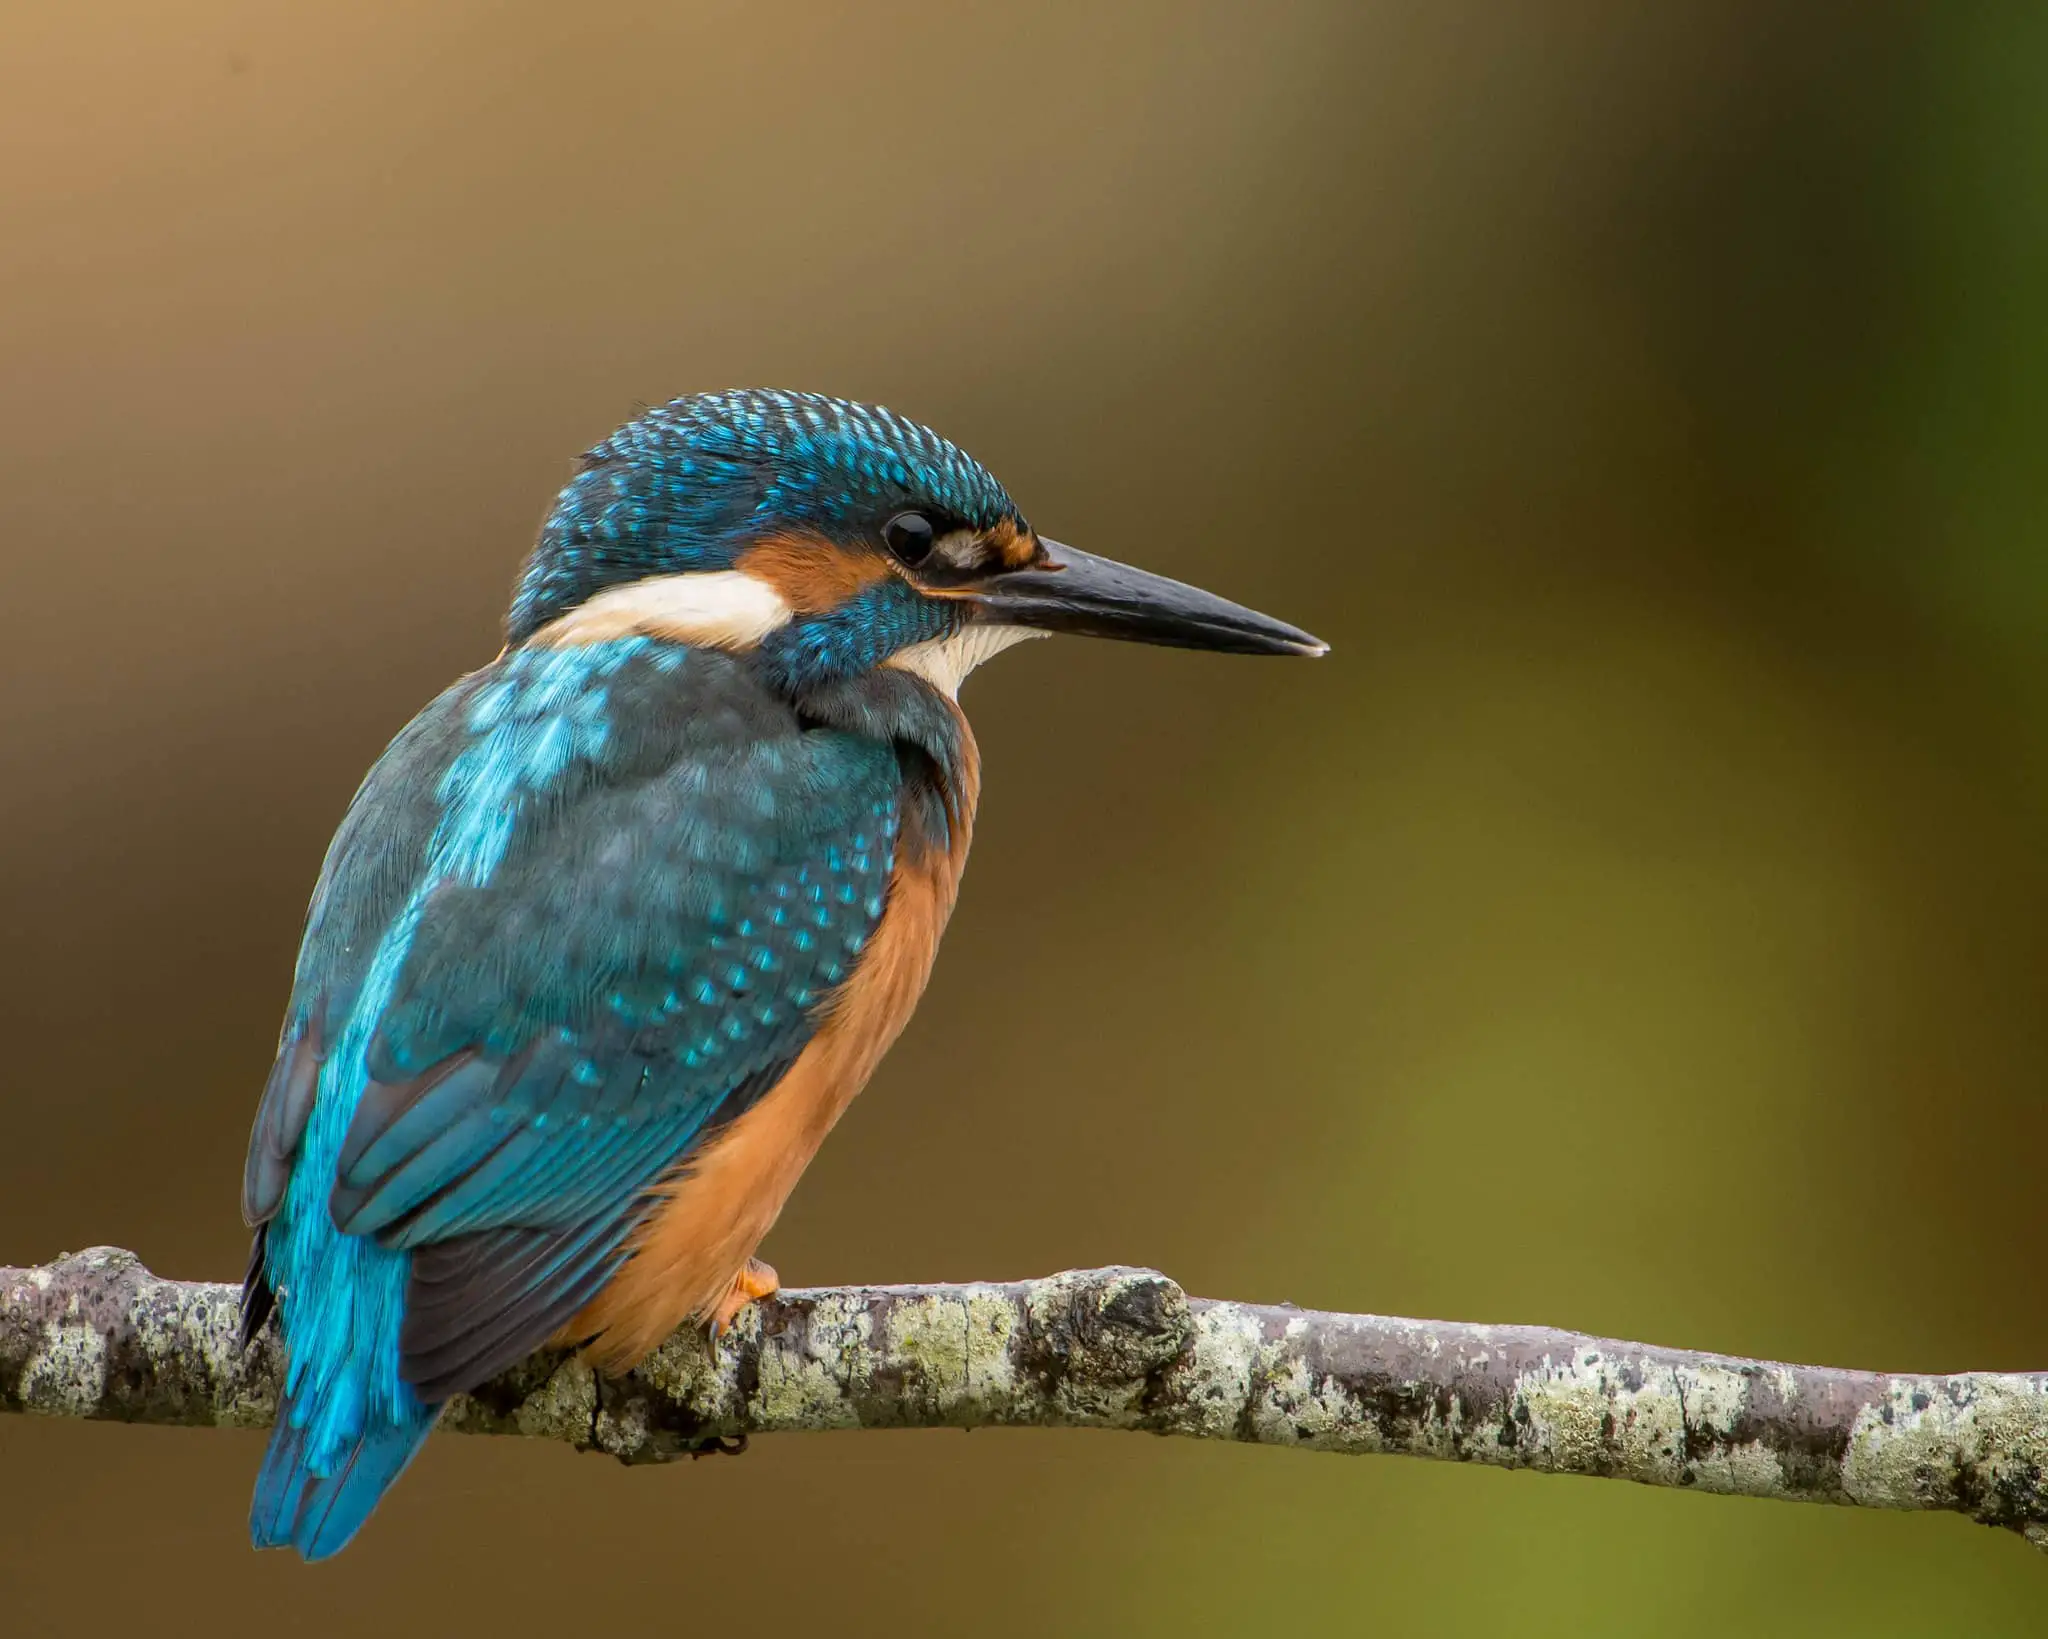 kingfisher sitting on a branch